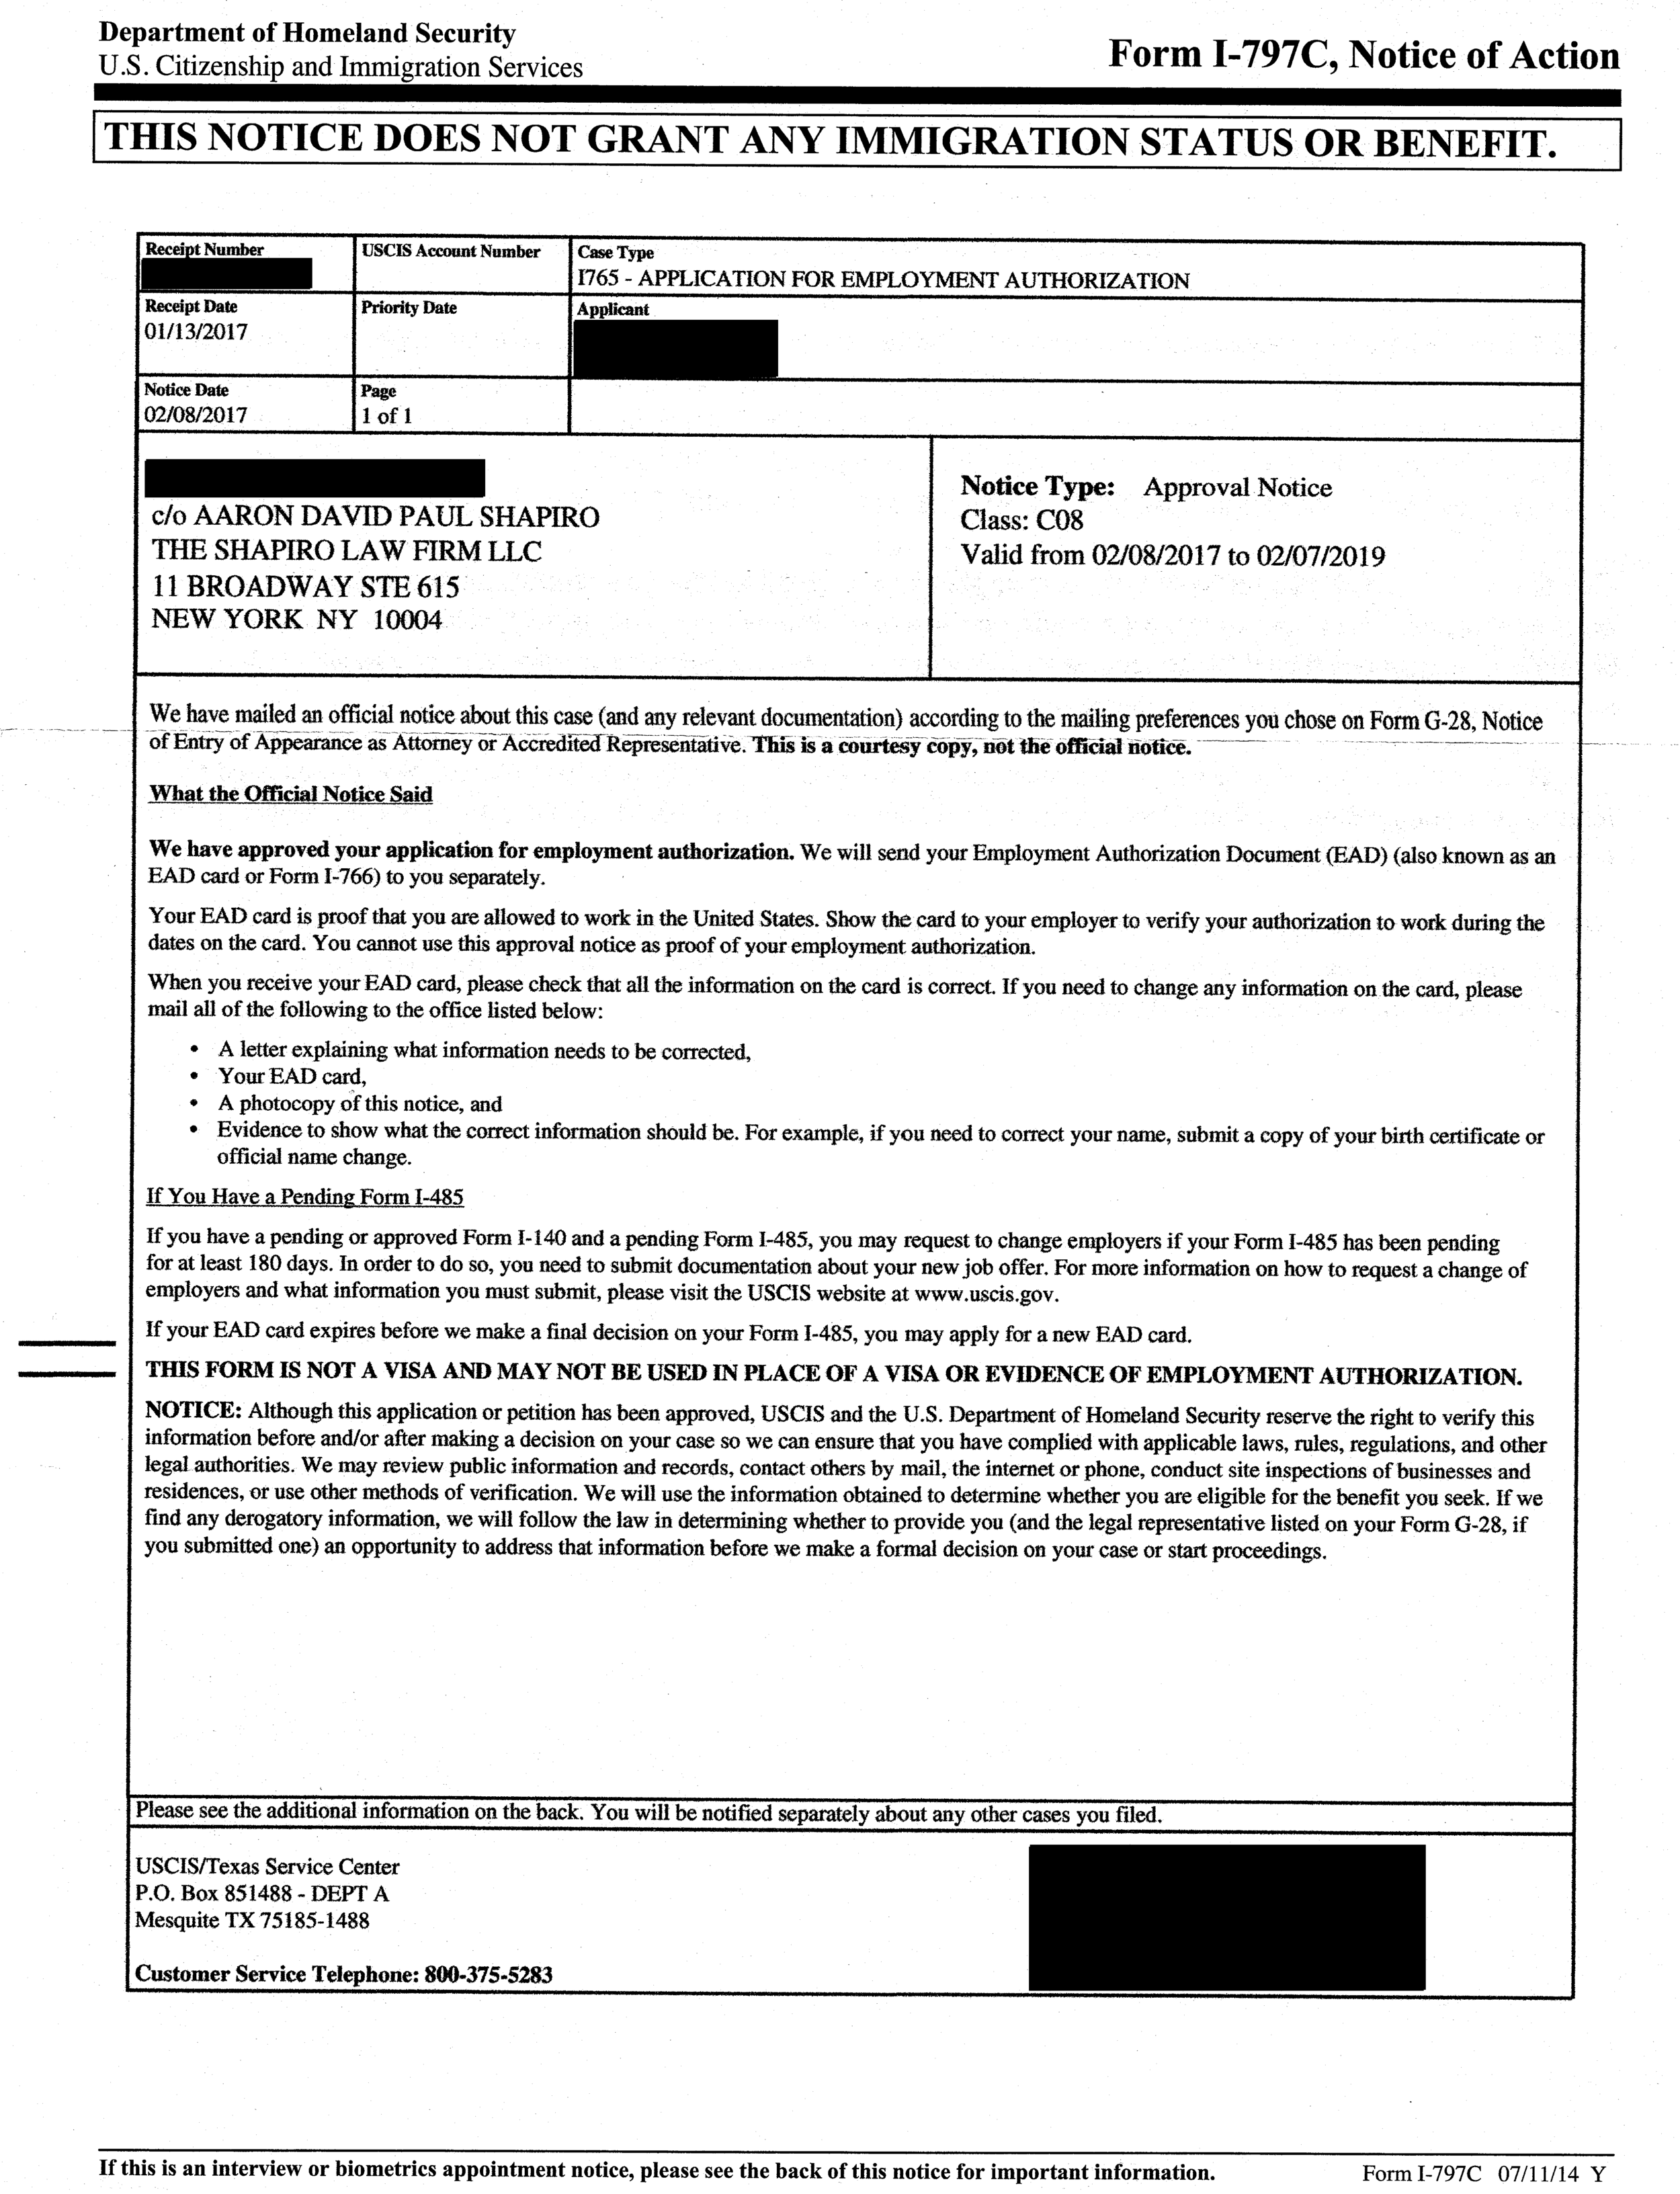 Form I-797, Notice of Action - I-765 Approval Notice